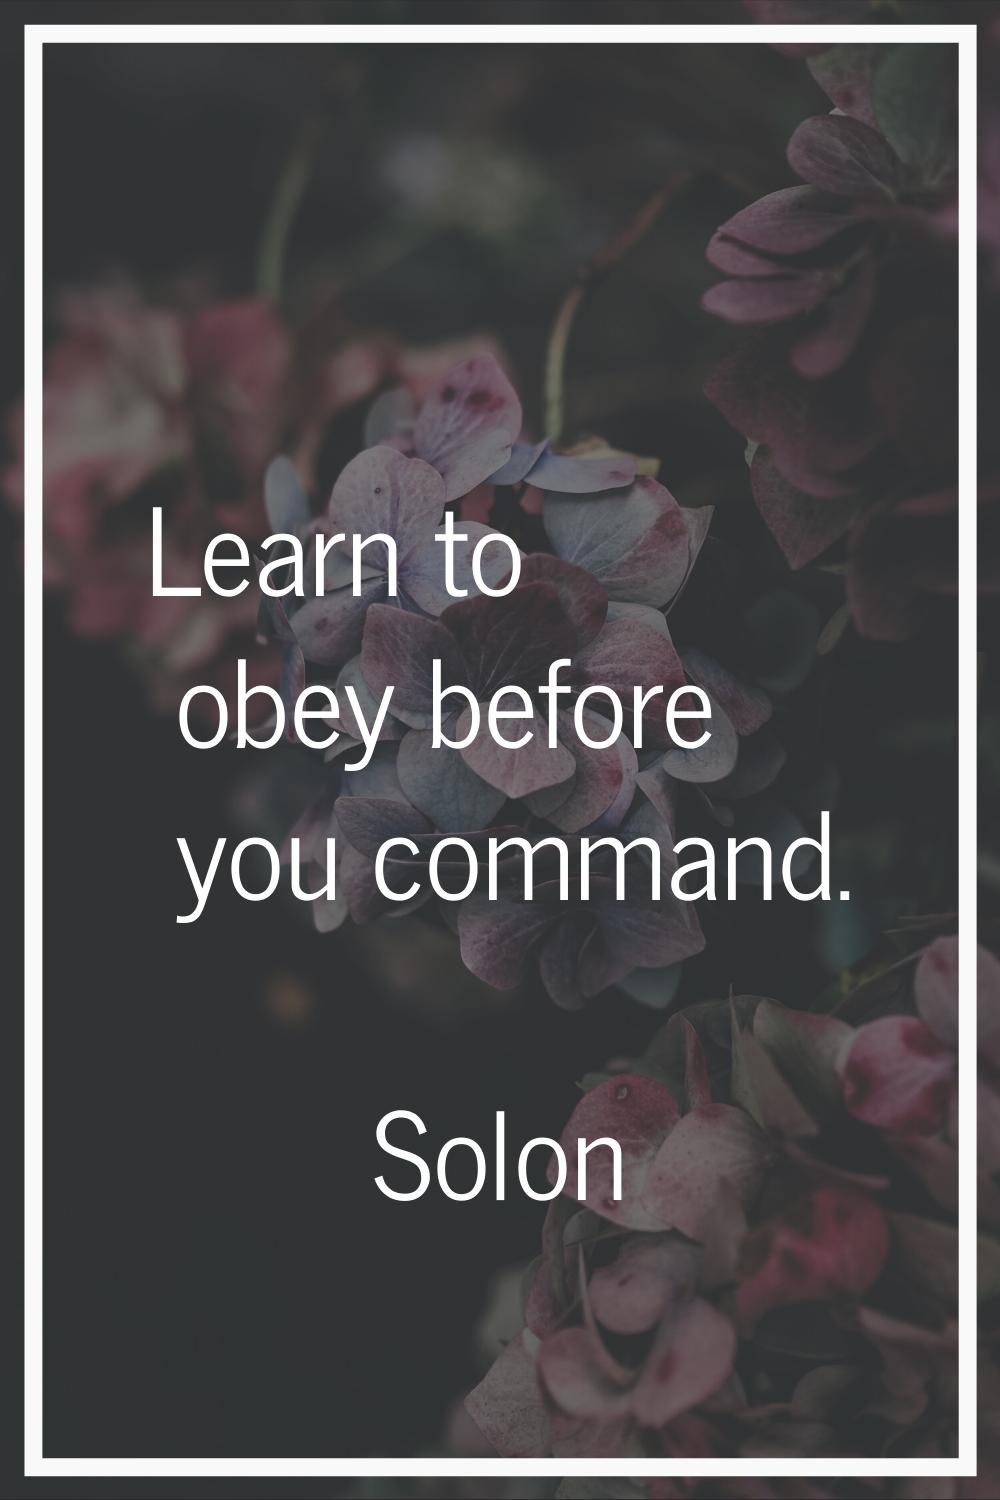 Learn to obey before you command.